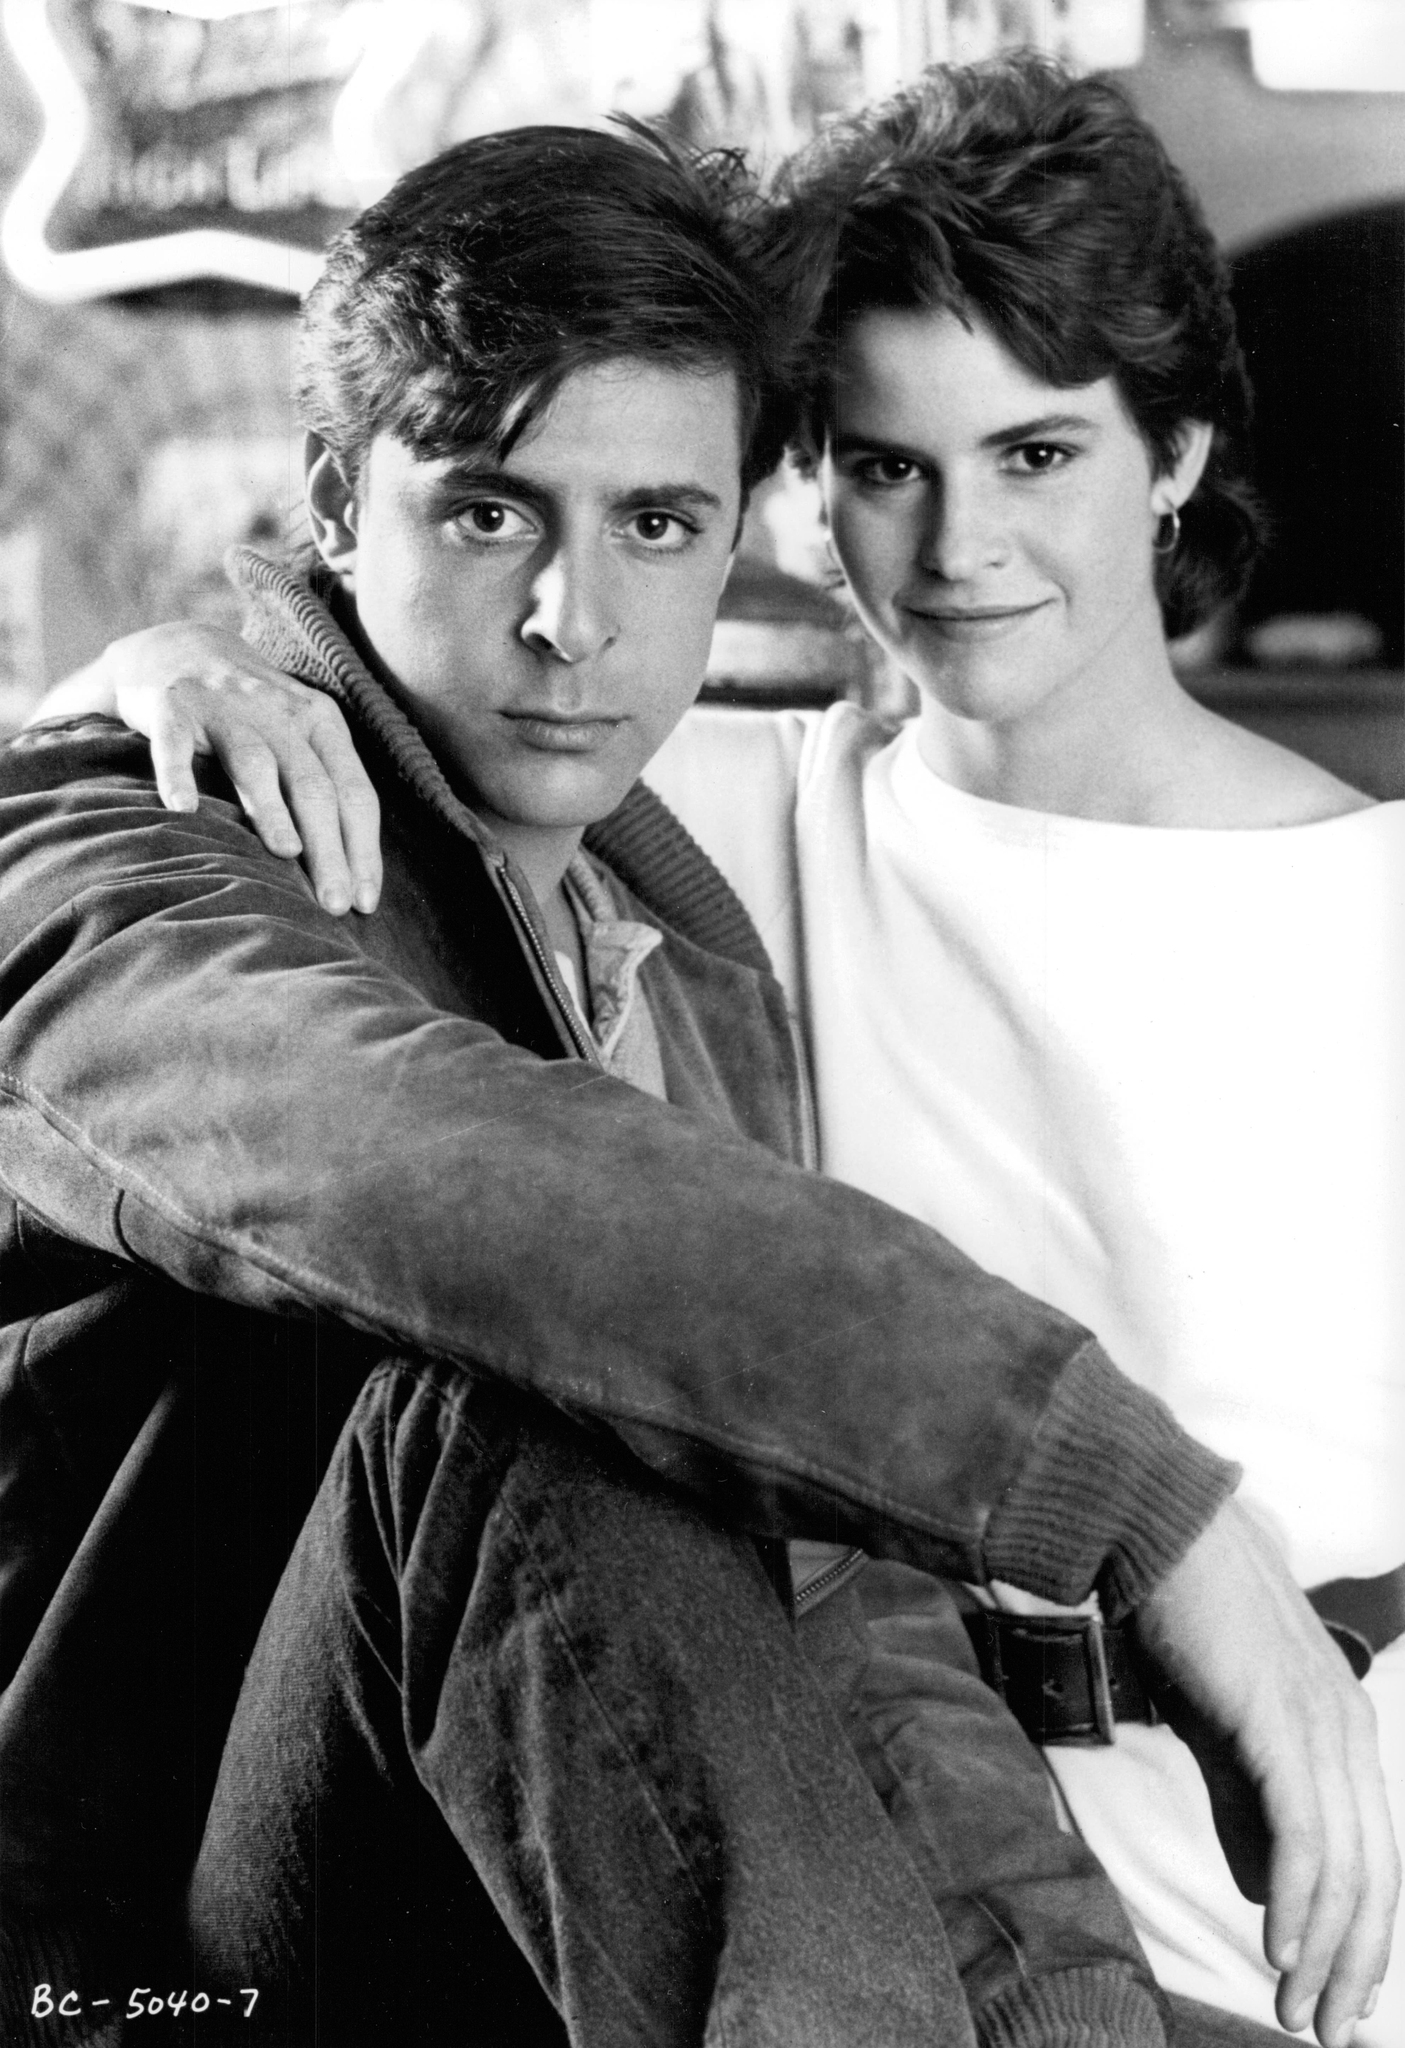 Still of Judd Nelson and Ally Sheedy in Blue City (1986)